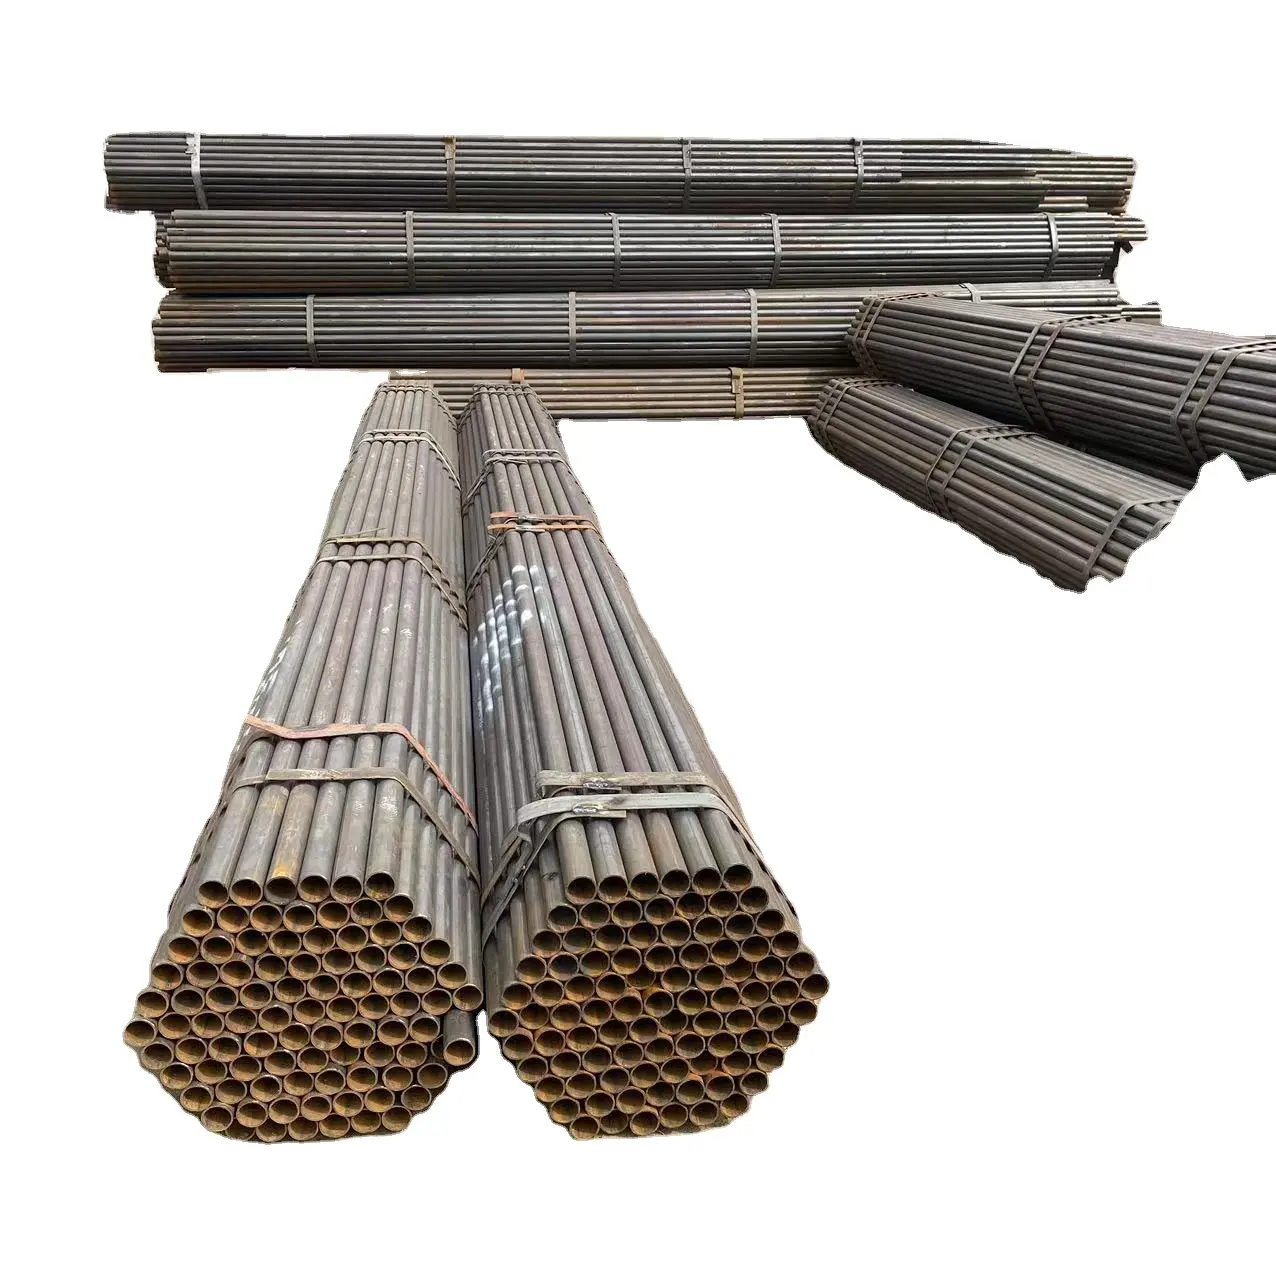 DN40 scaffold steel pipe steel pipe connection fasteners are used for the construction of enclosure support